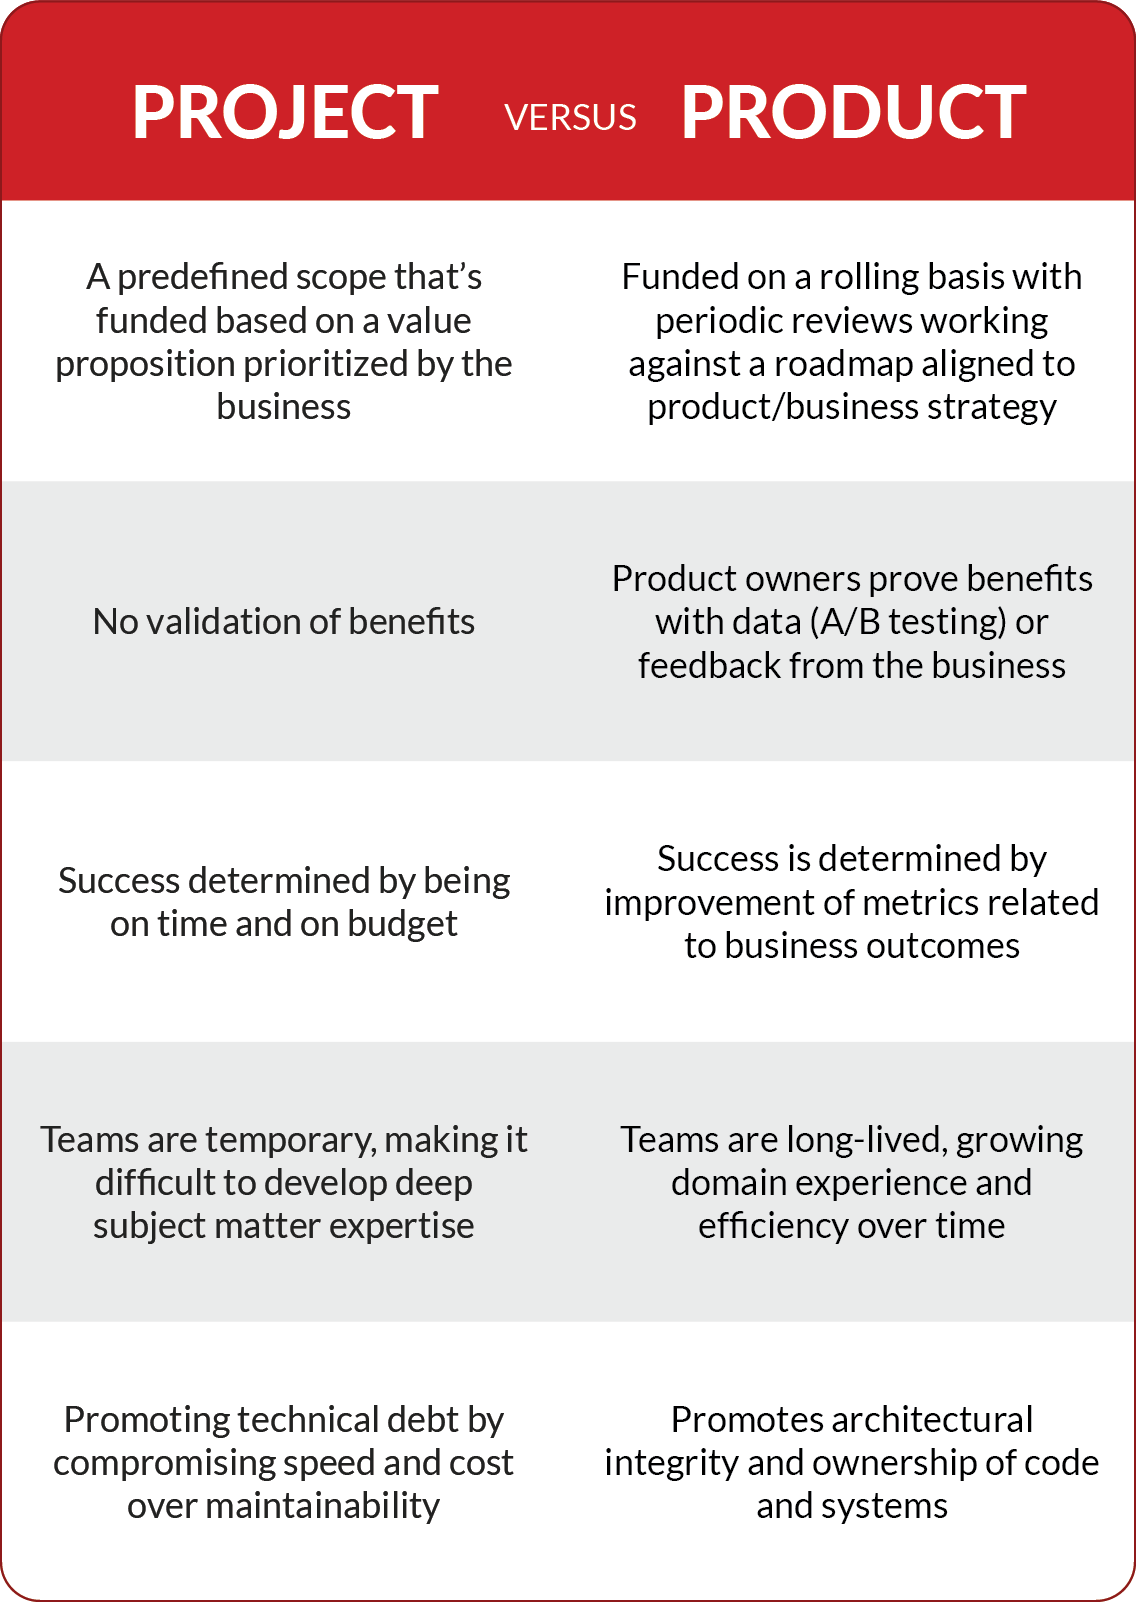   Table showing the difference between project and product development.